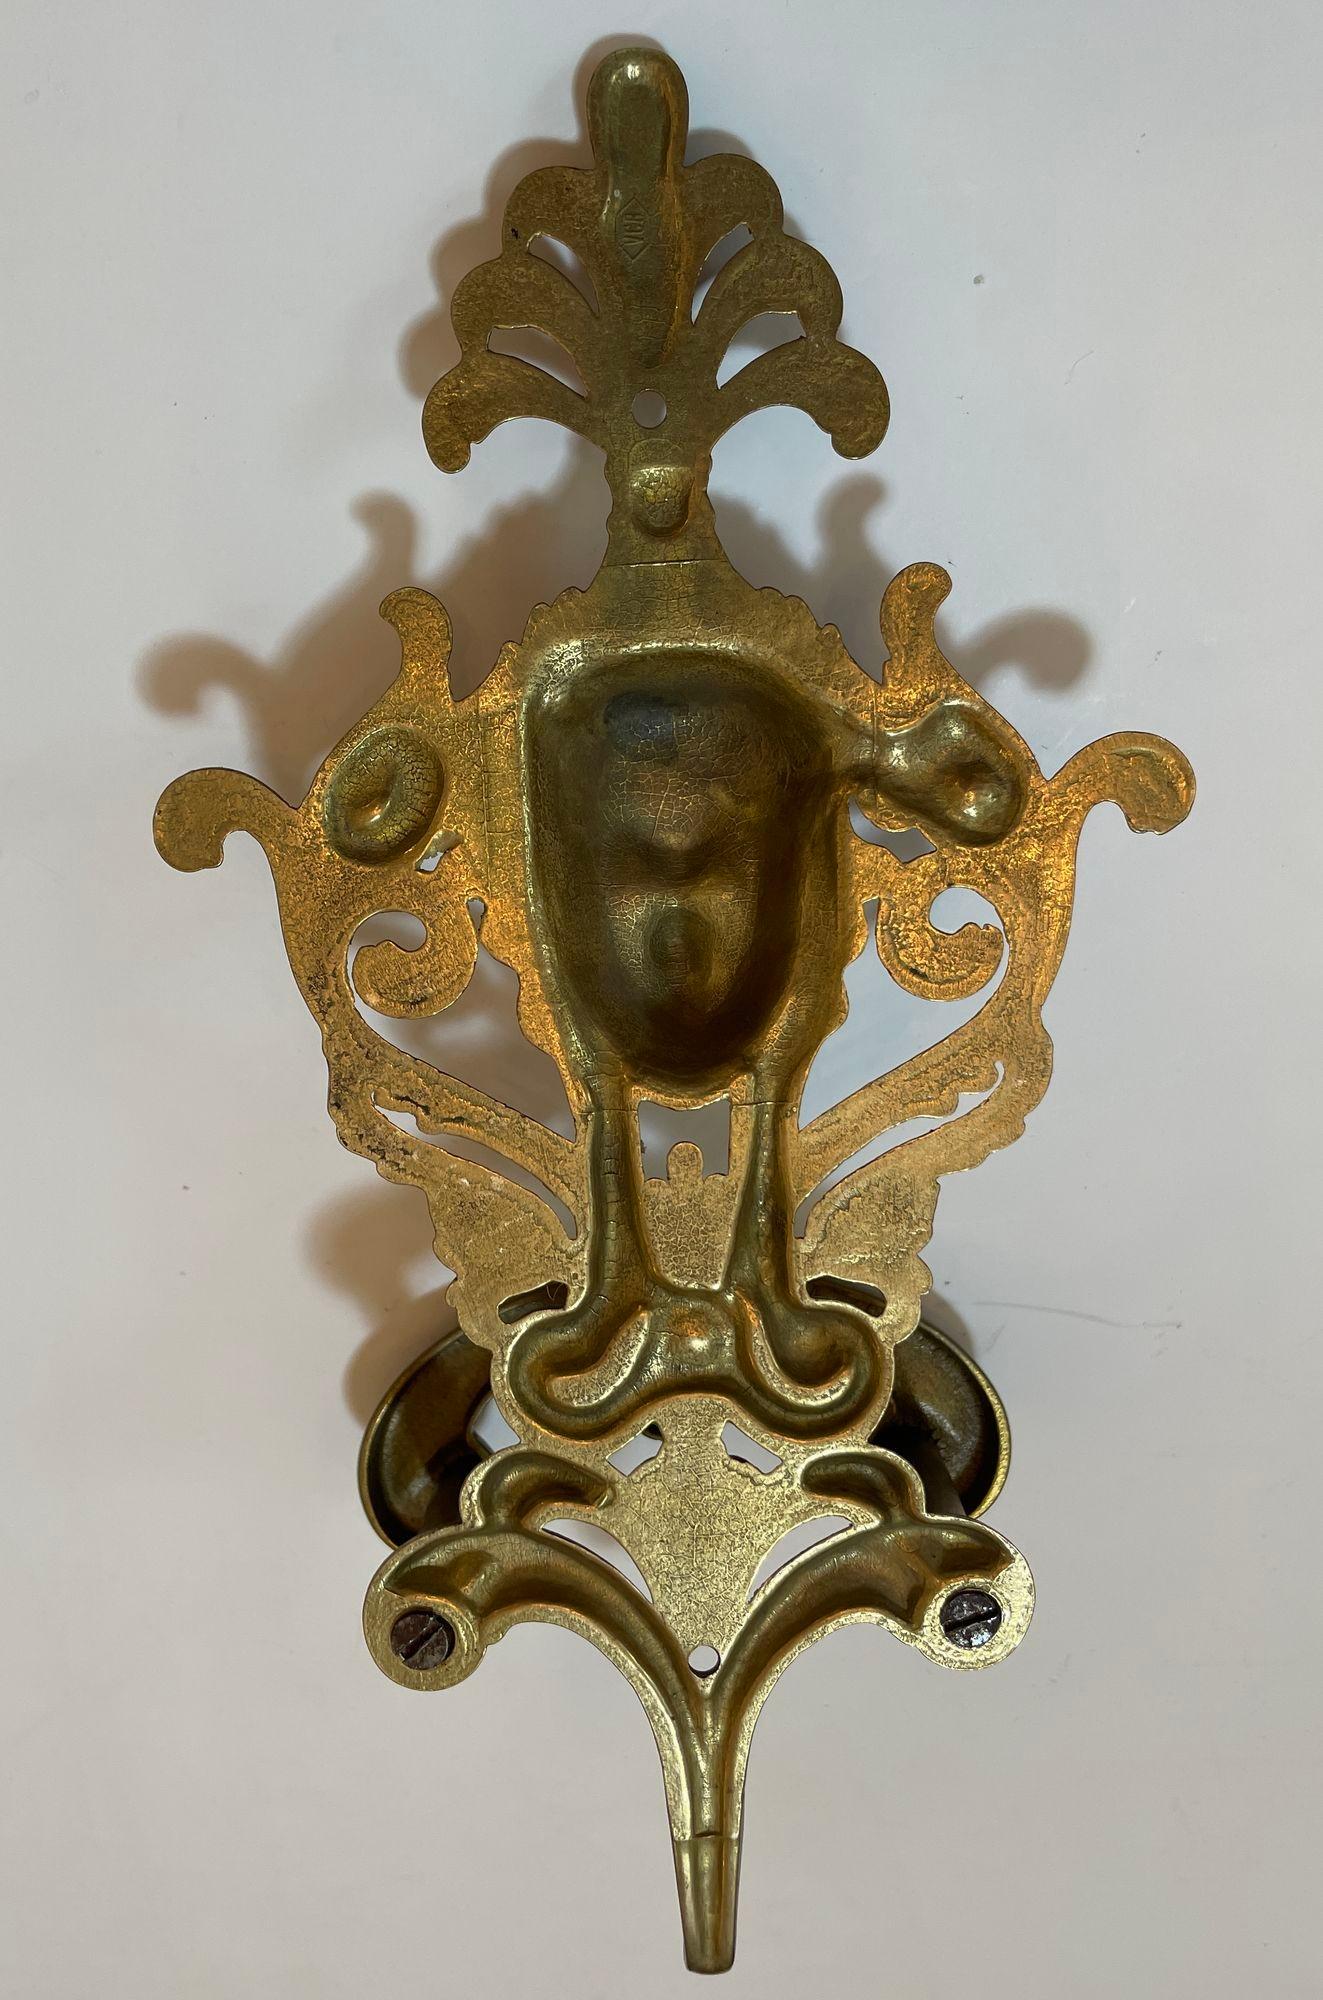 Antique Ornate Italian Figural Architectural Cast Brass Wall Hook Decor Set of 3 For Sale 1